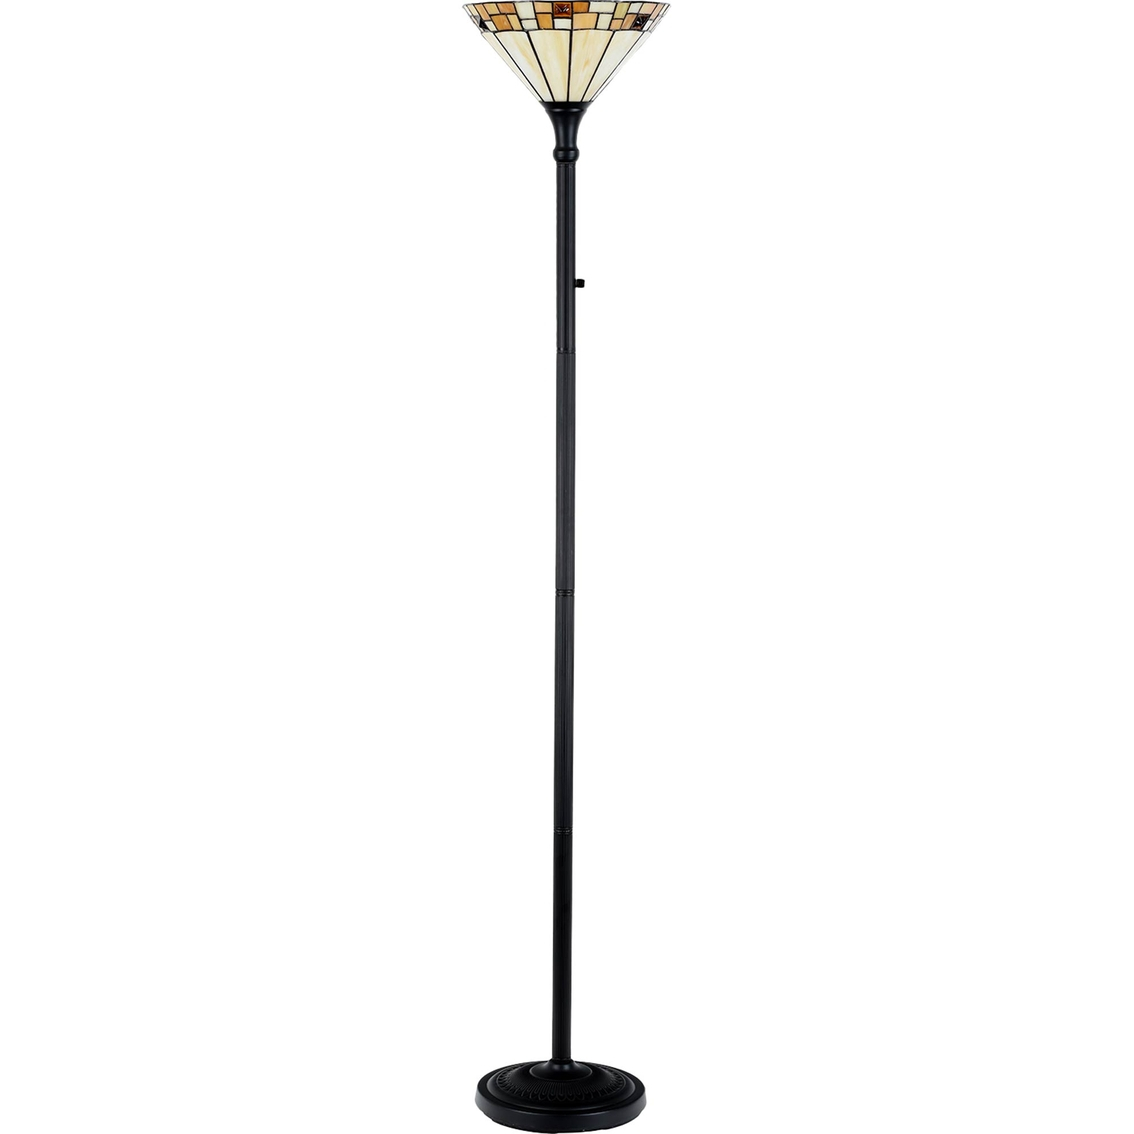 Dale Tiffany Sundance Led Torchiere Floor Lamp Lamps in dimensions 1134 X 1134